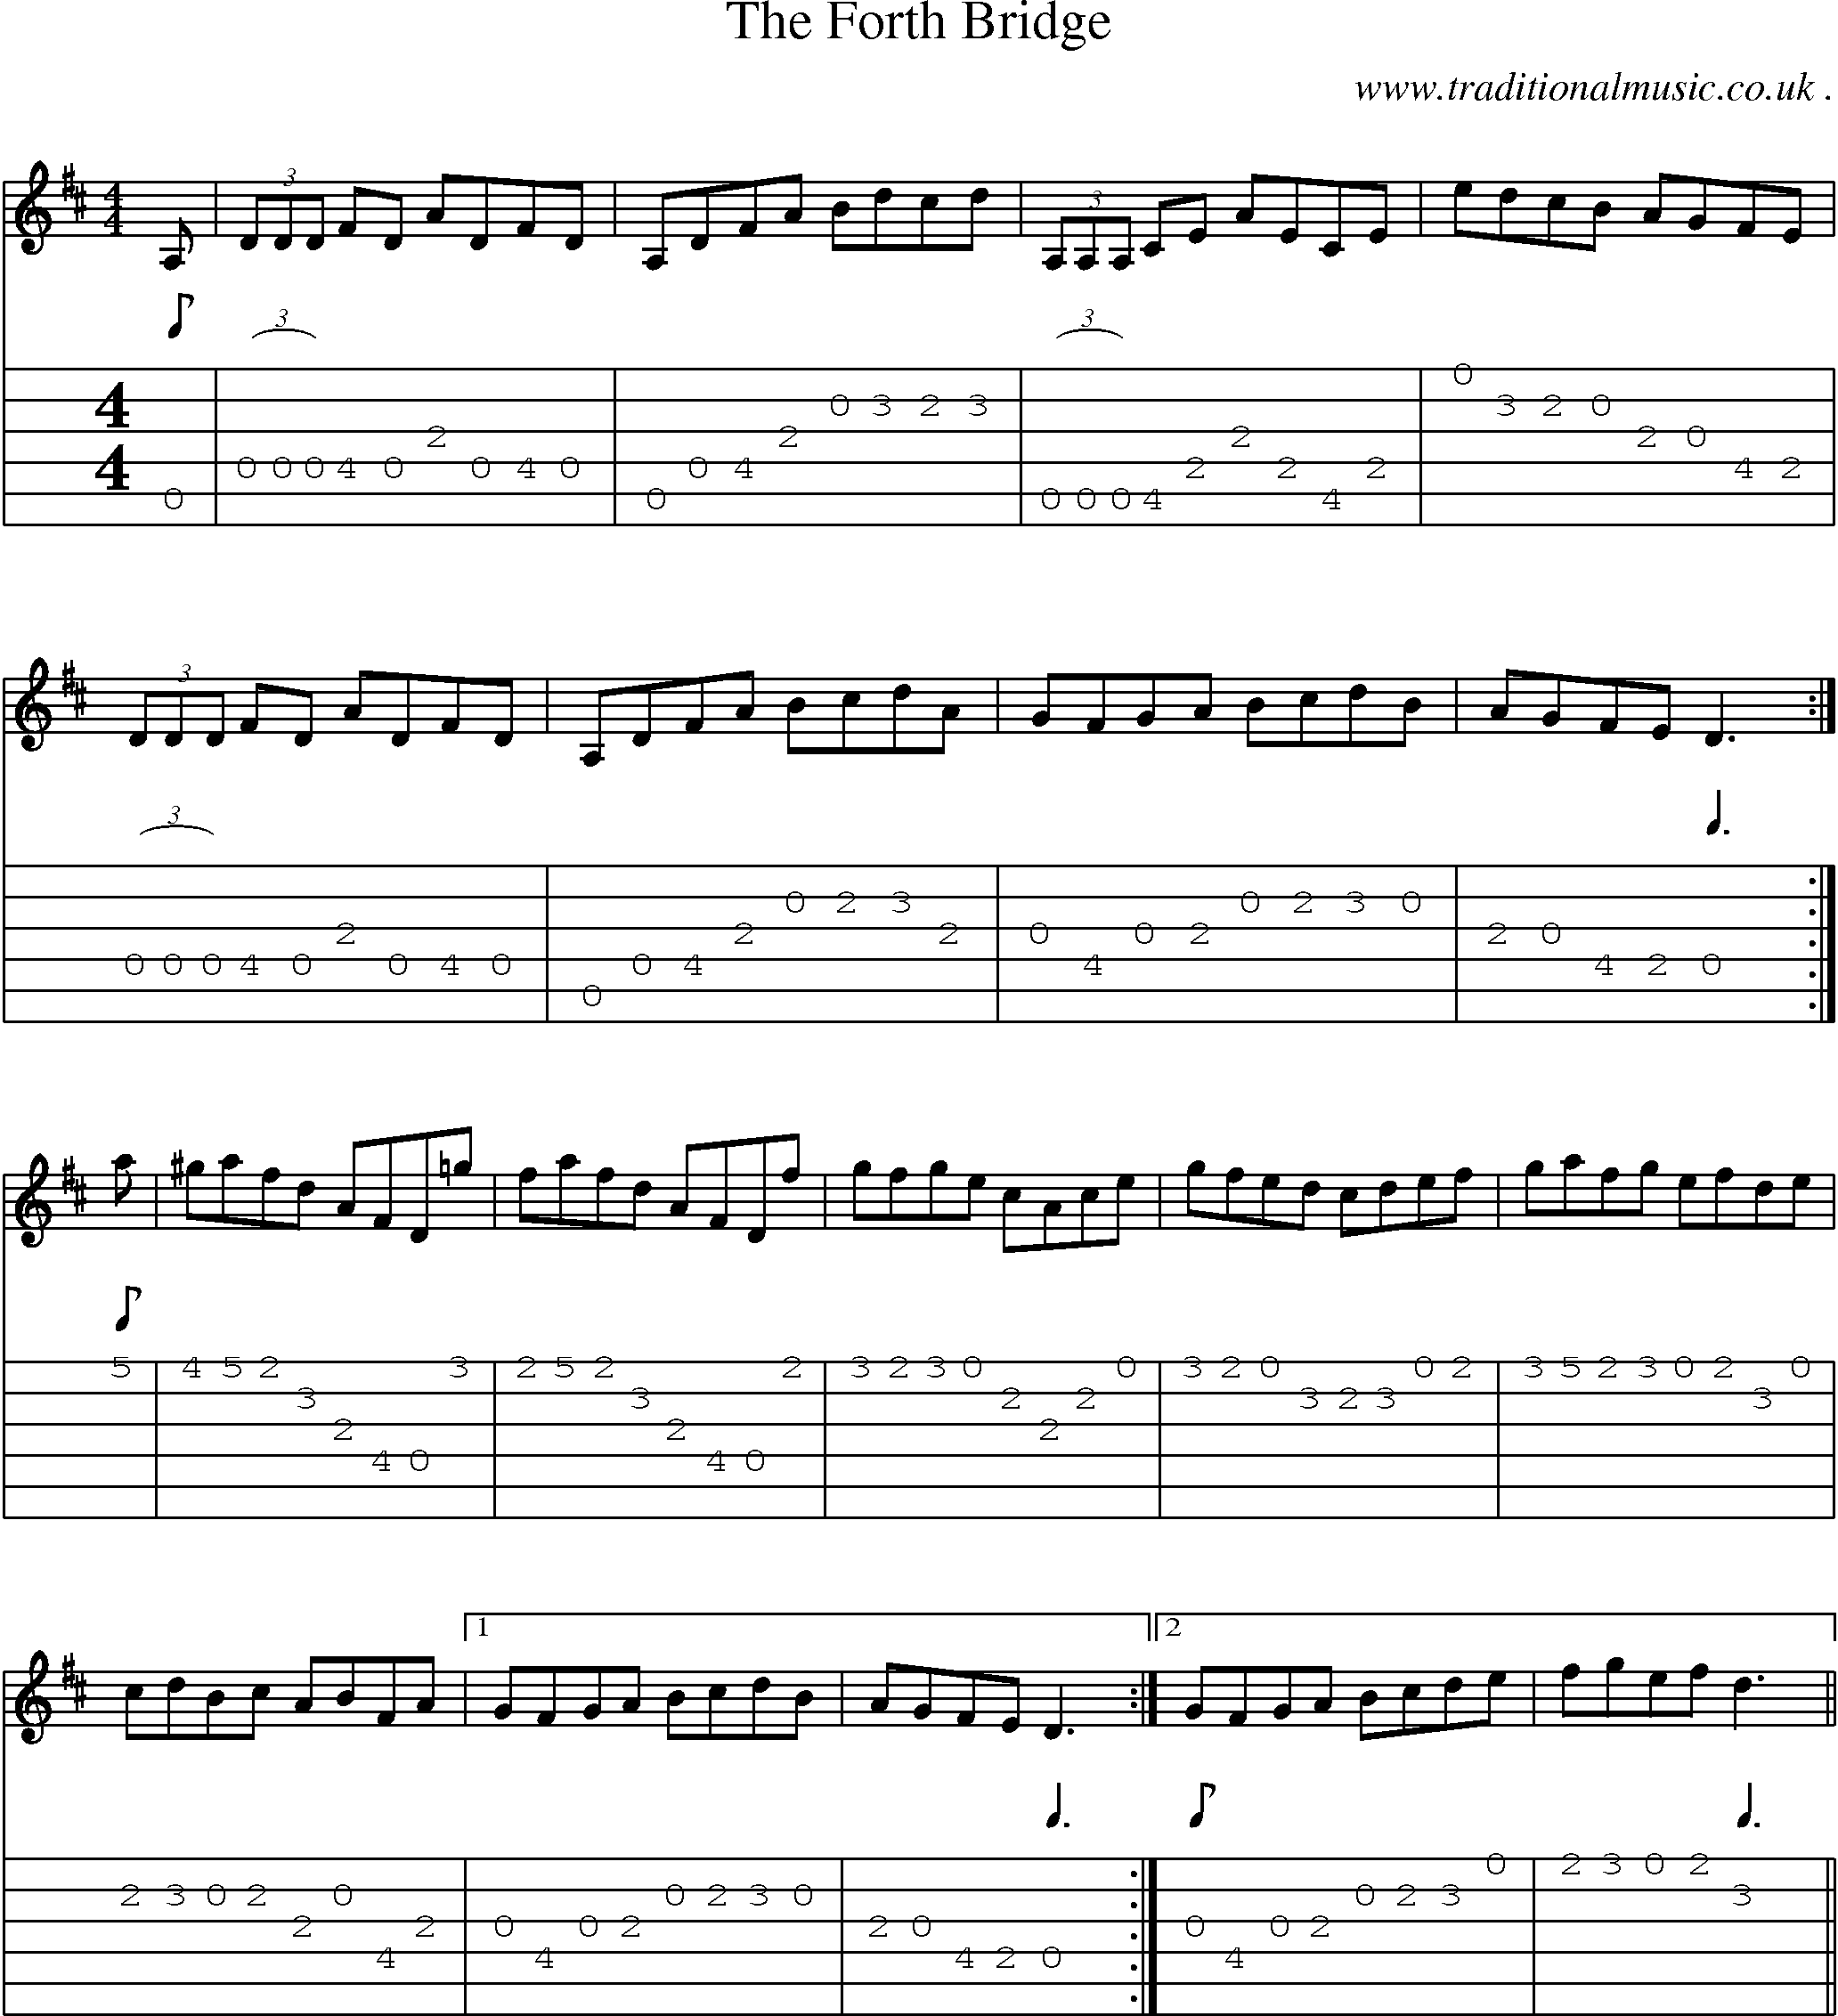 Sheet-Music and Guitar Tabs for The Forth Bridge